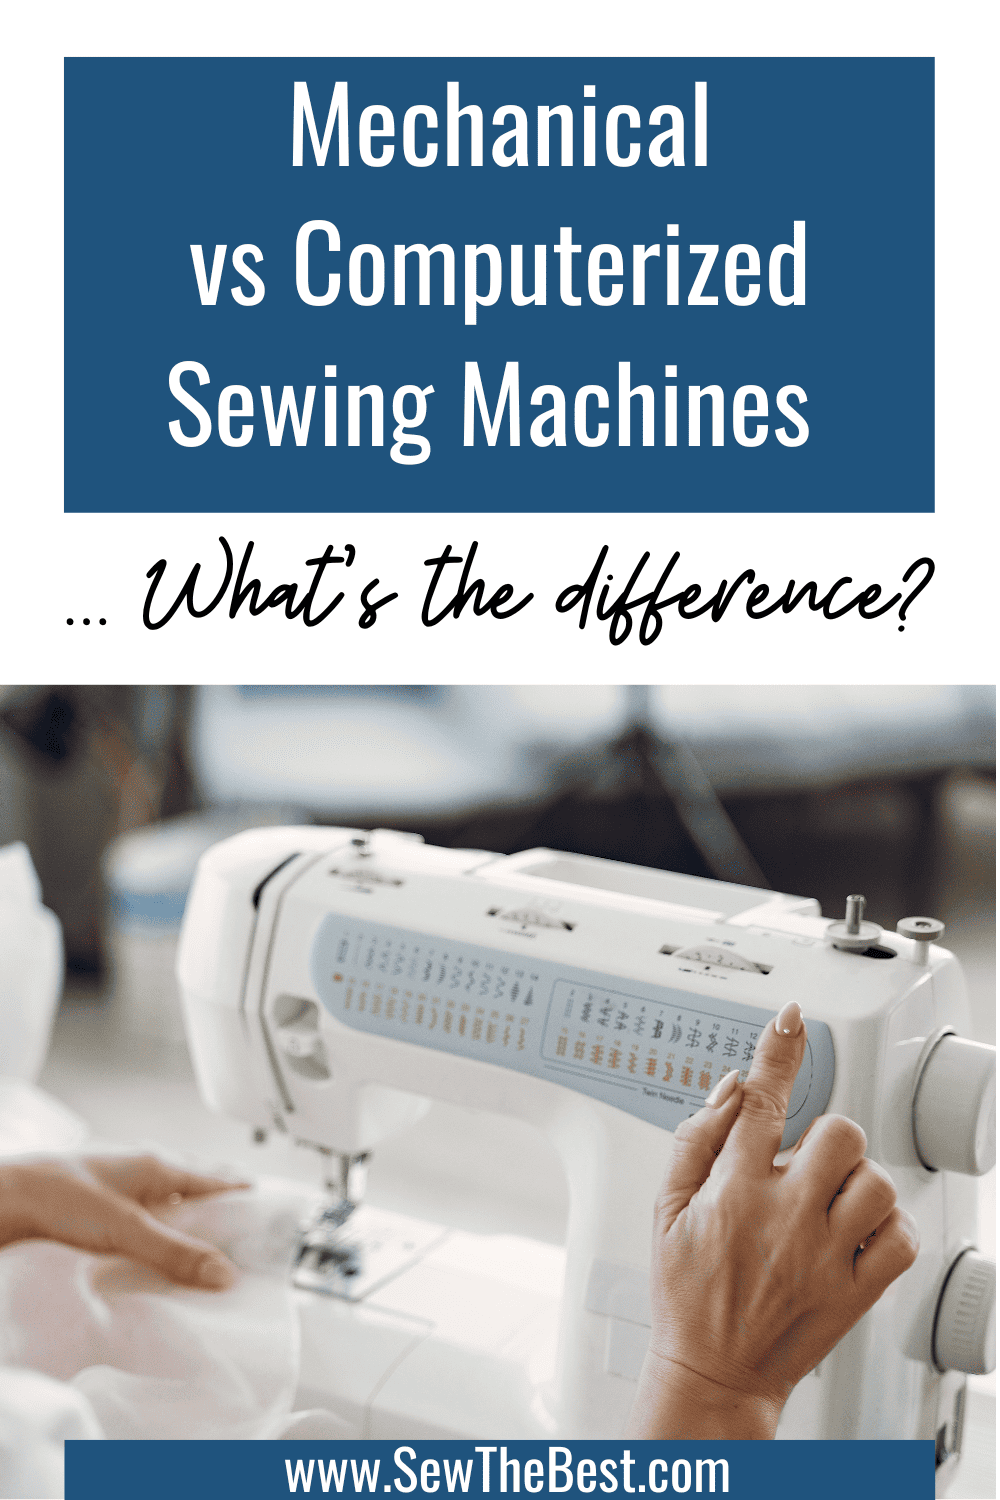 Mechanical vs Computerized Sewing Machines ... What's the difference? Picture of a person sewing at a mechanical sewing machine follows.